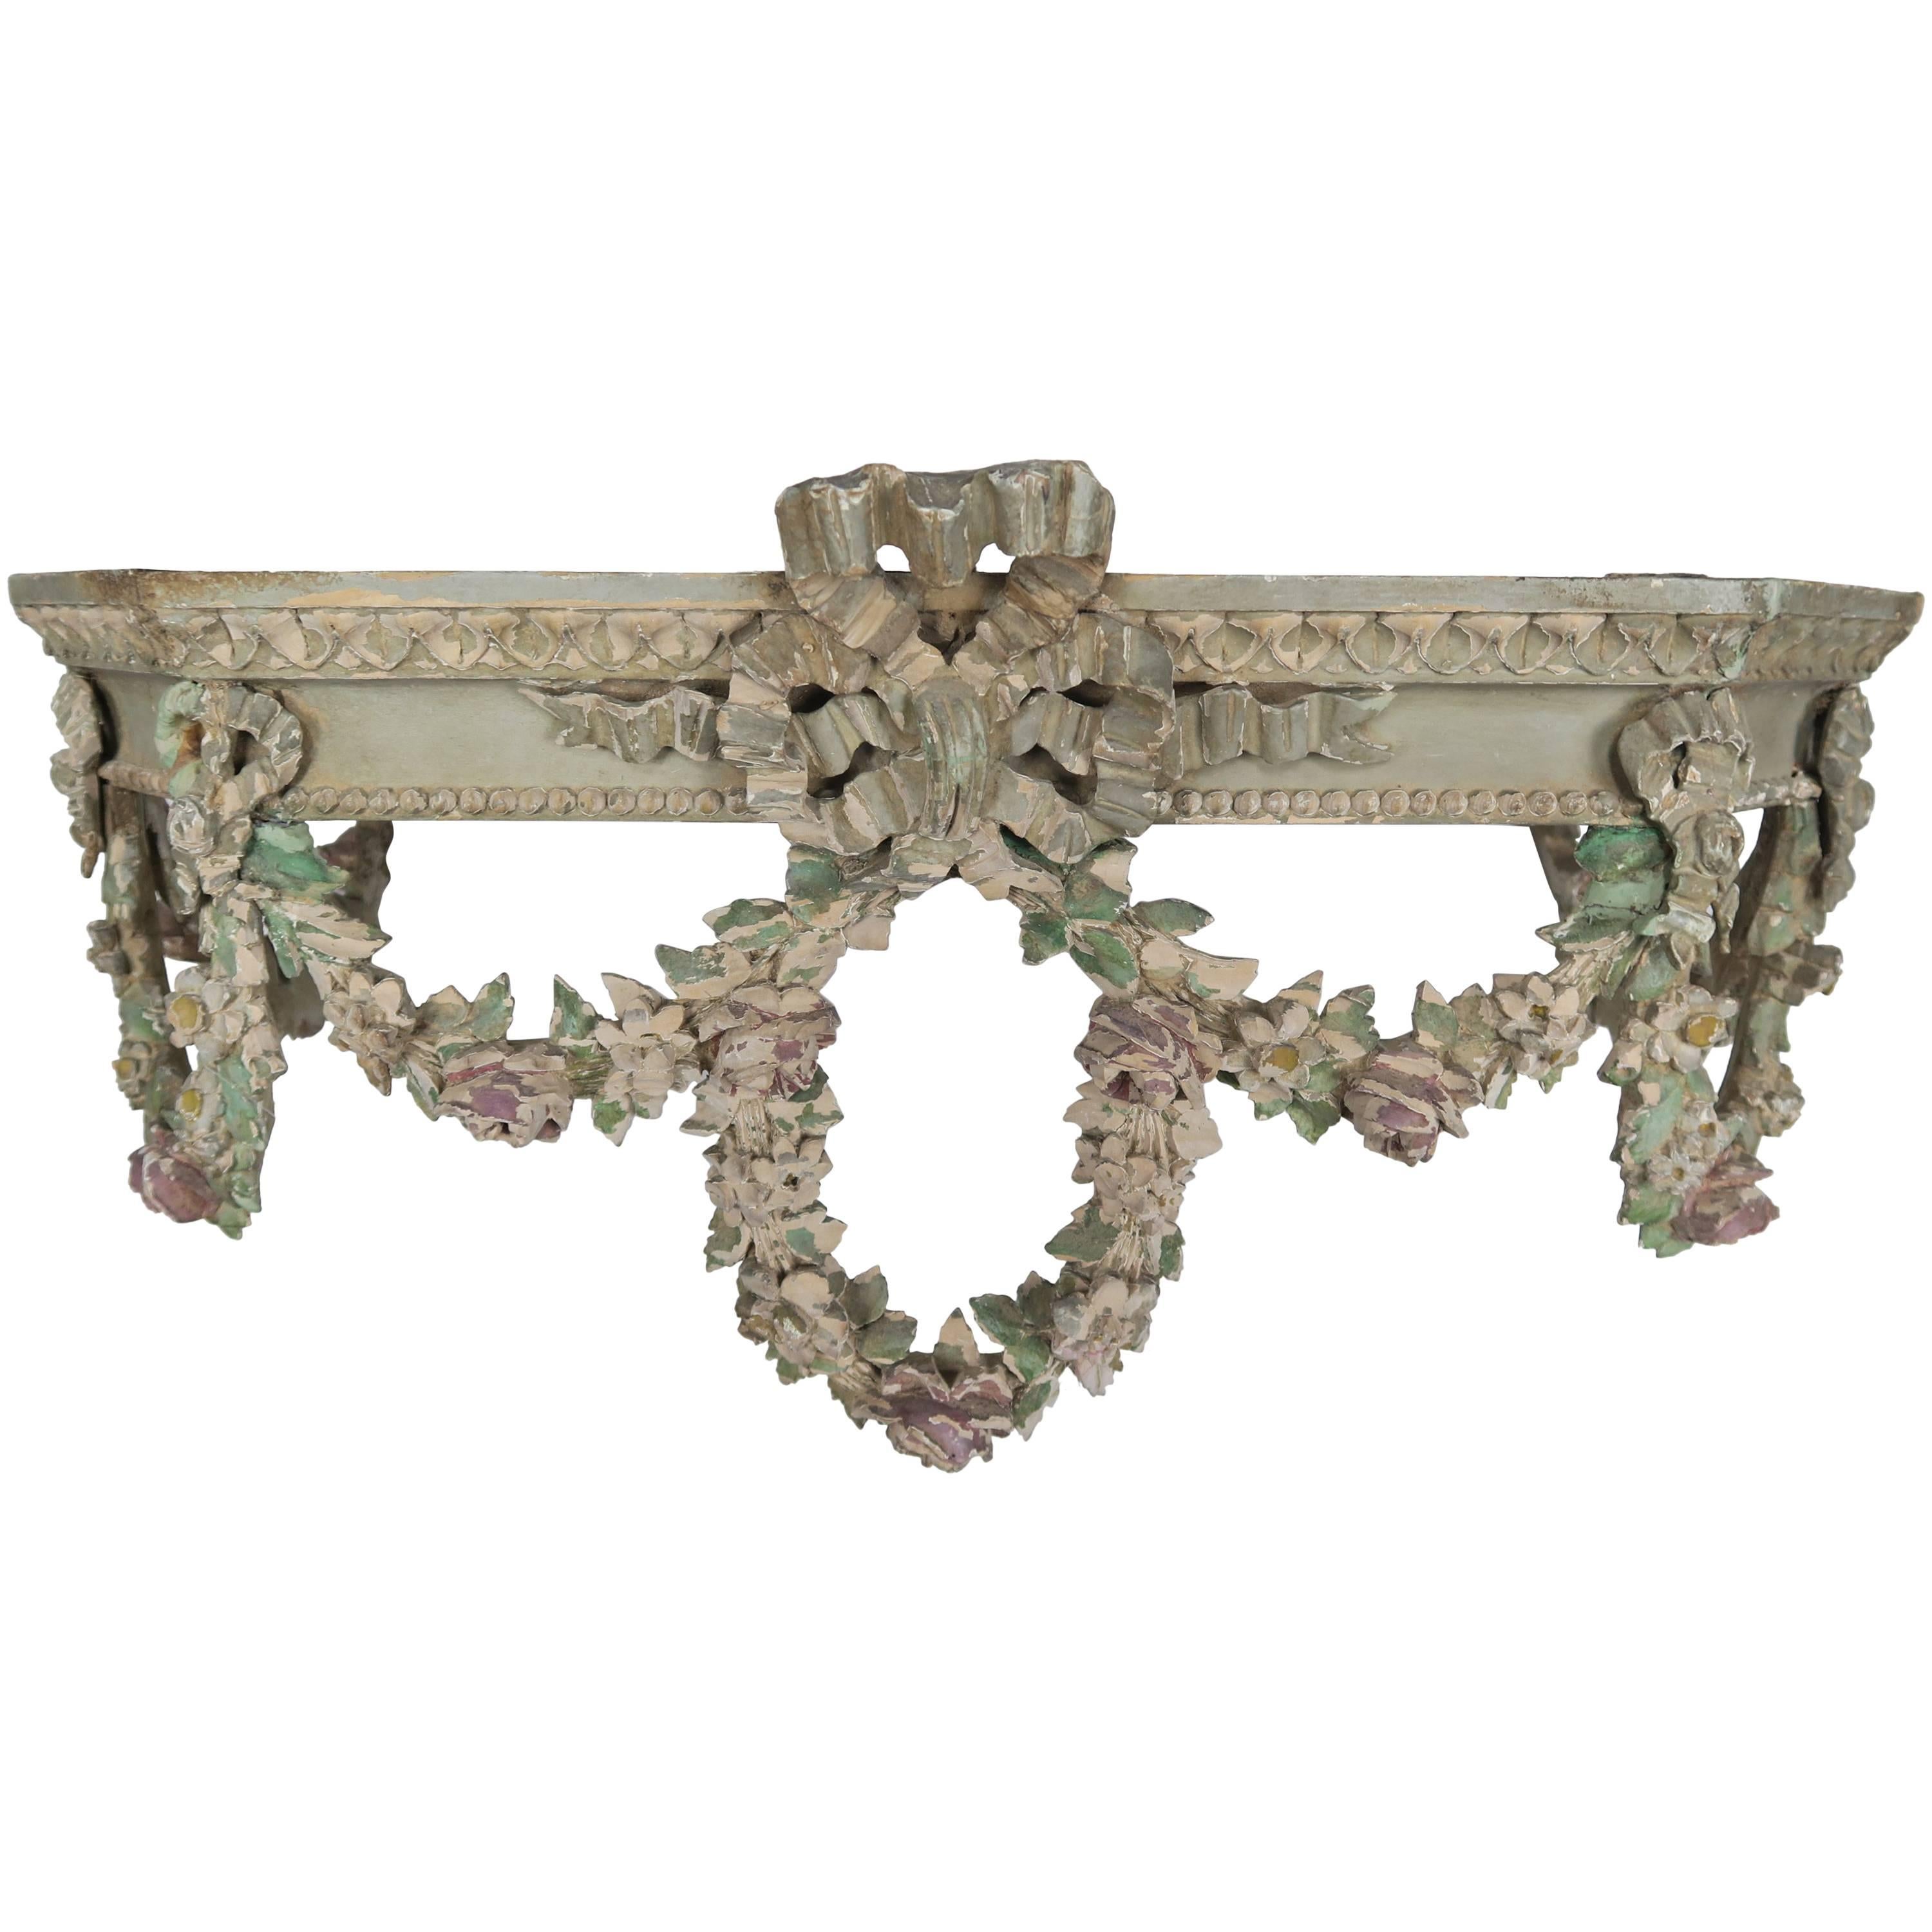 19th Century French Carved Bed Canopy with Garlands of Flowers